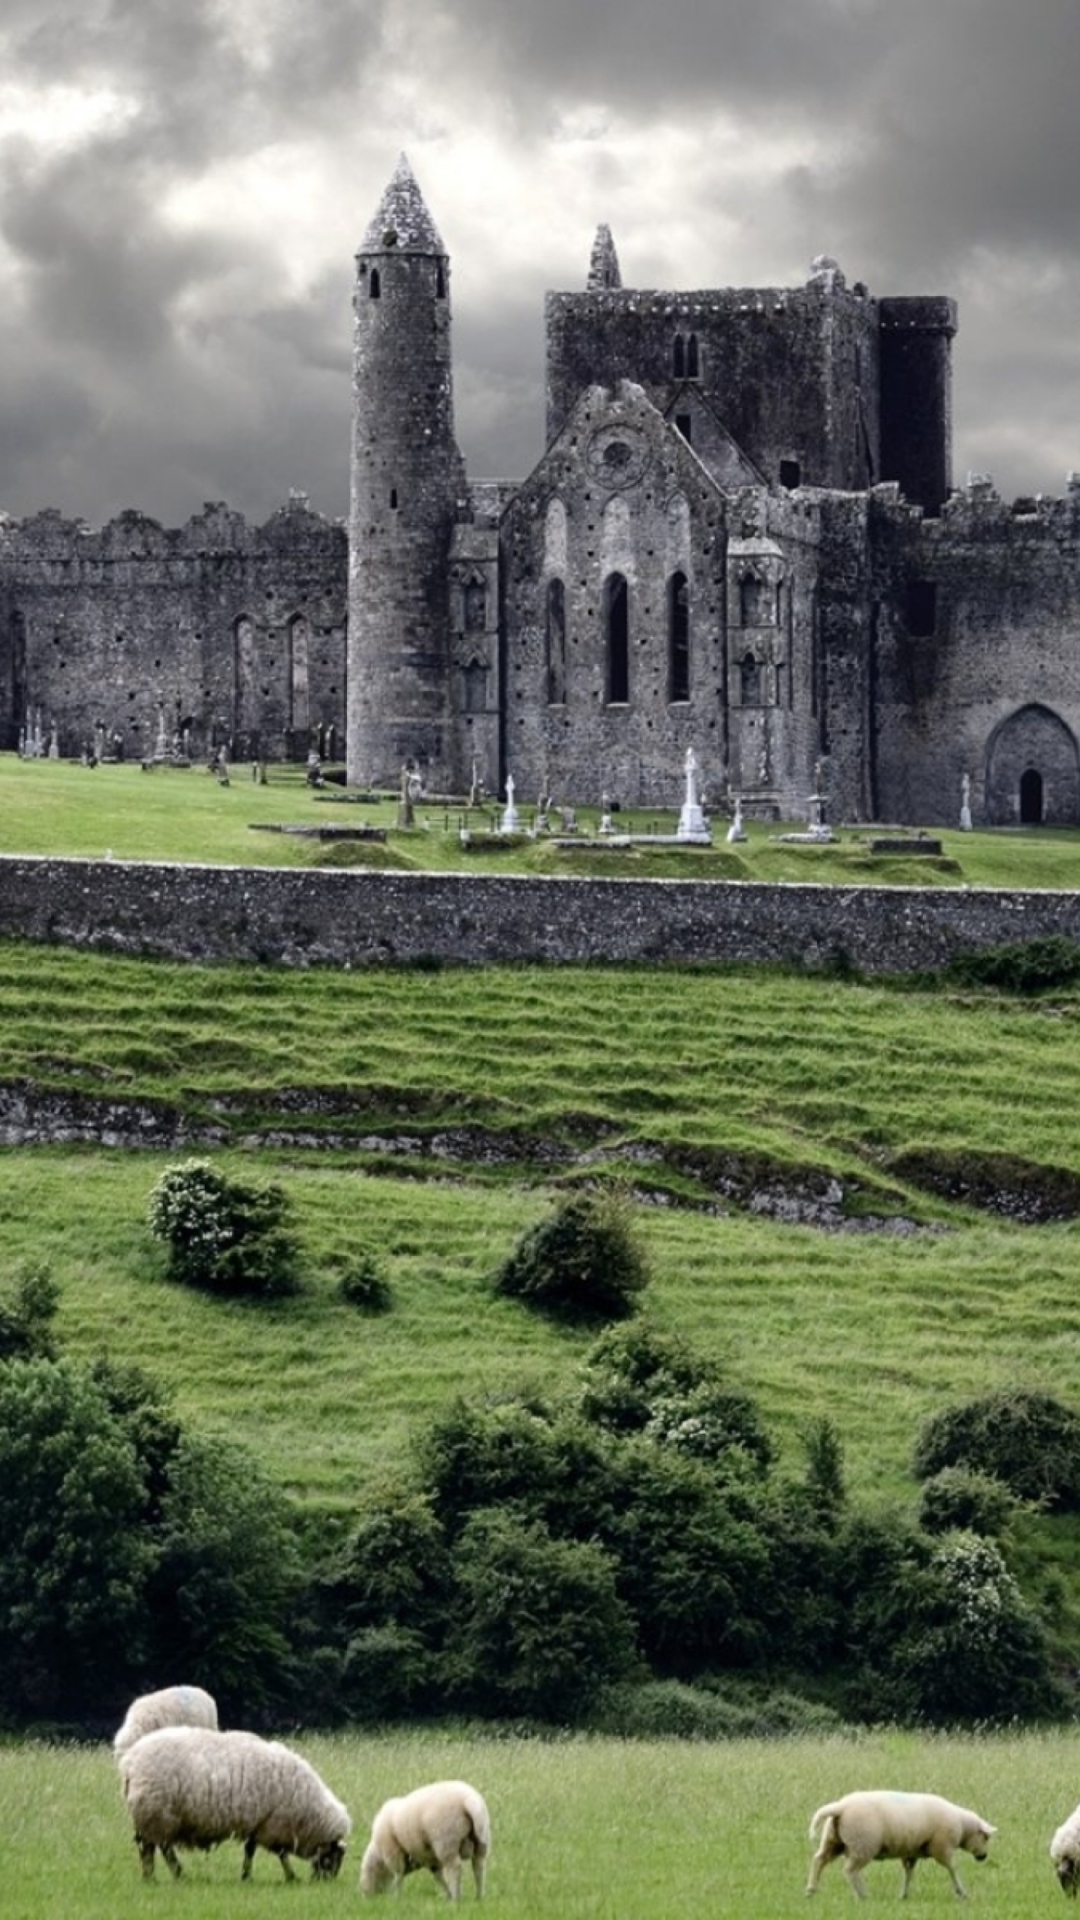 Ireland Landscape With Sheep And Castle screenshot #1 1080x1920